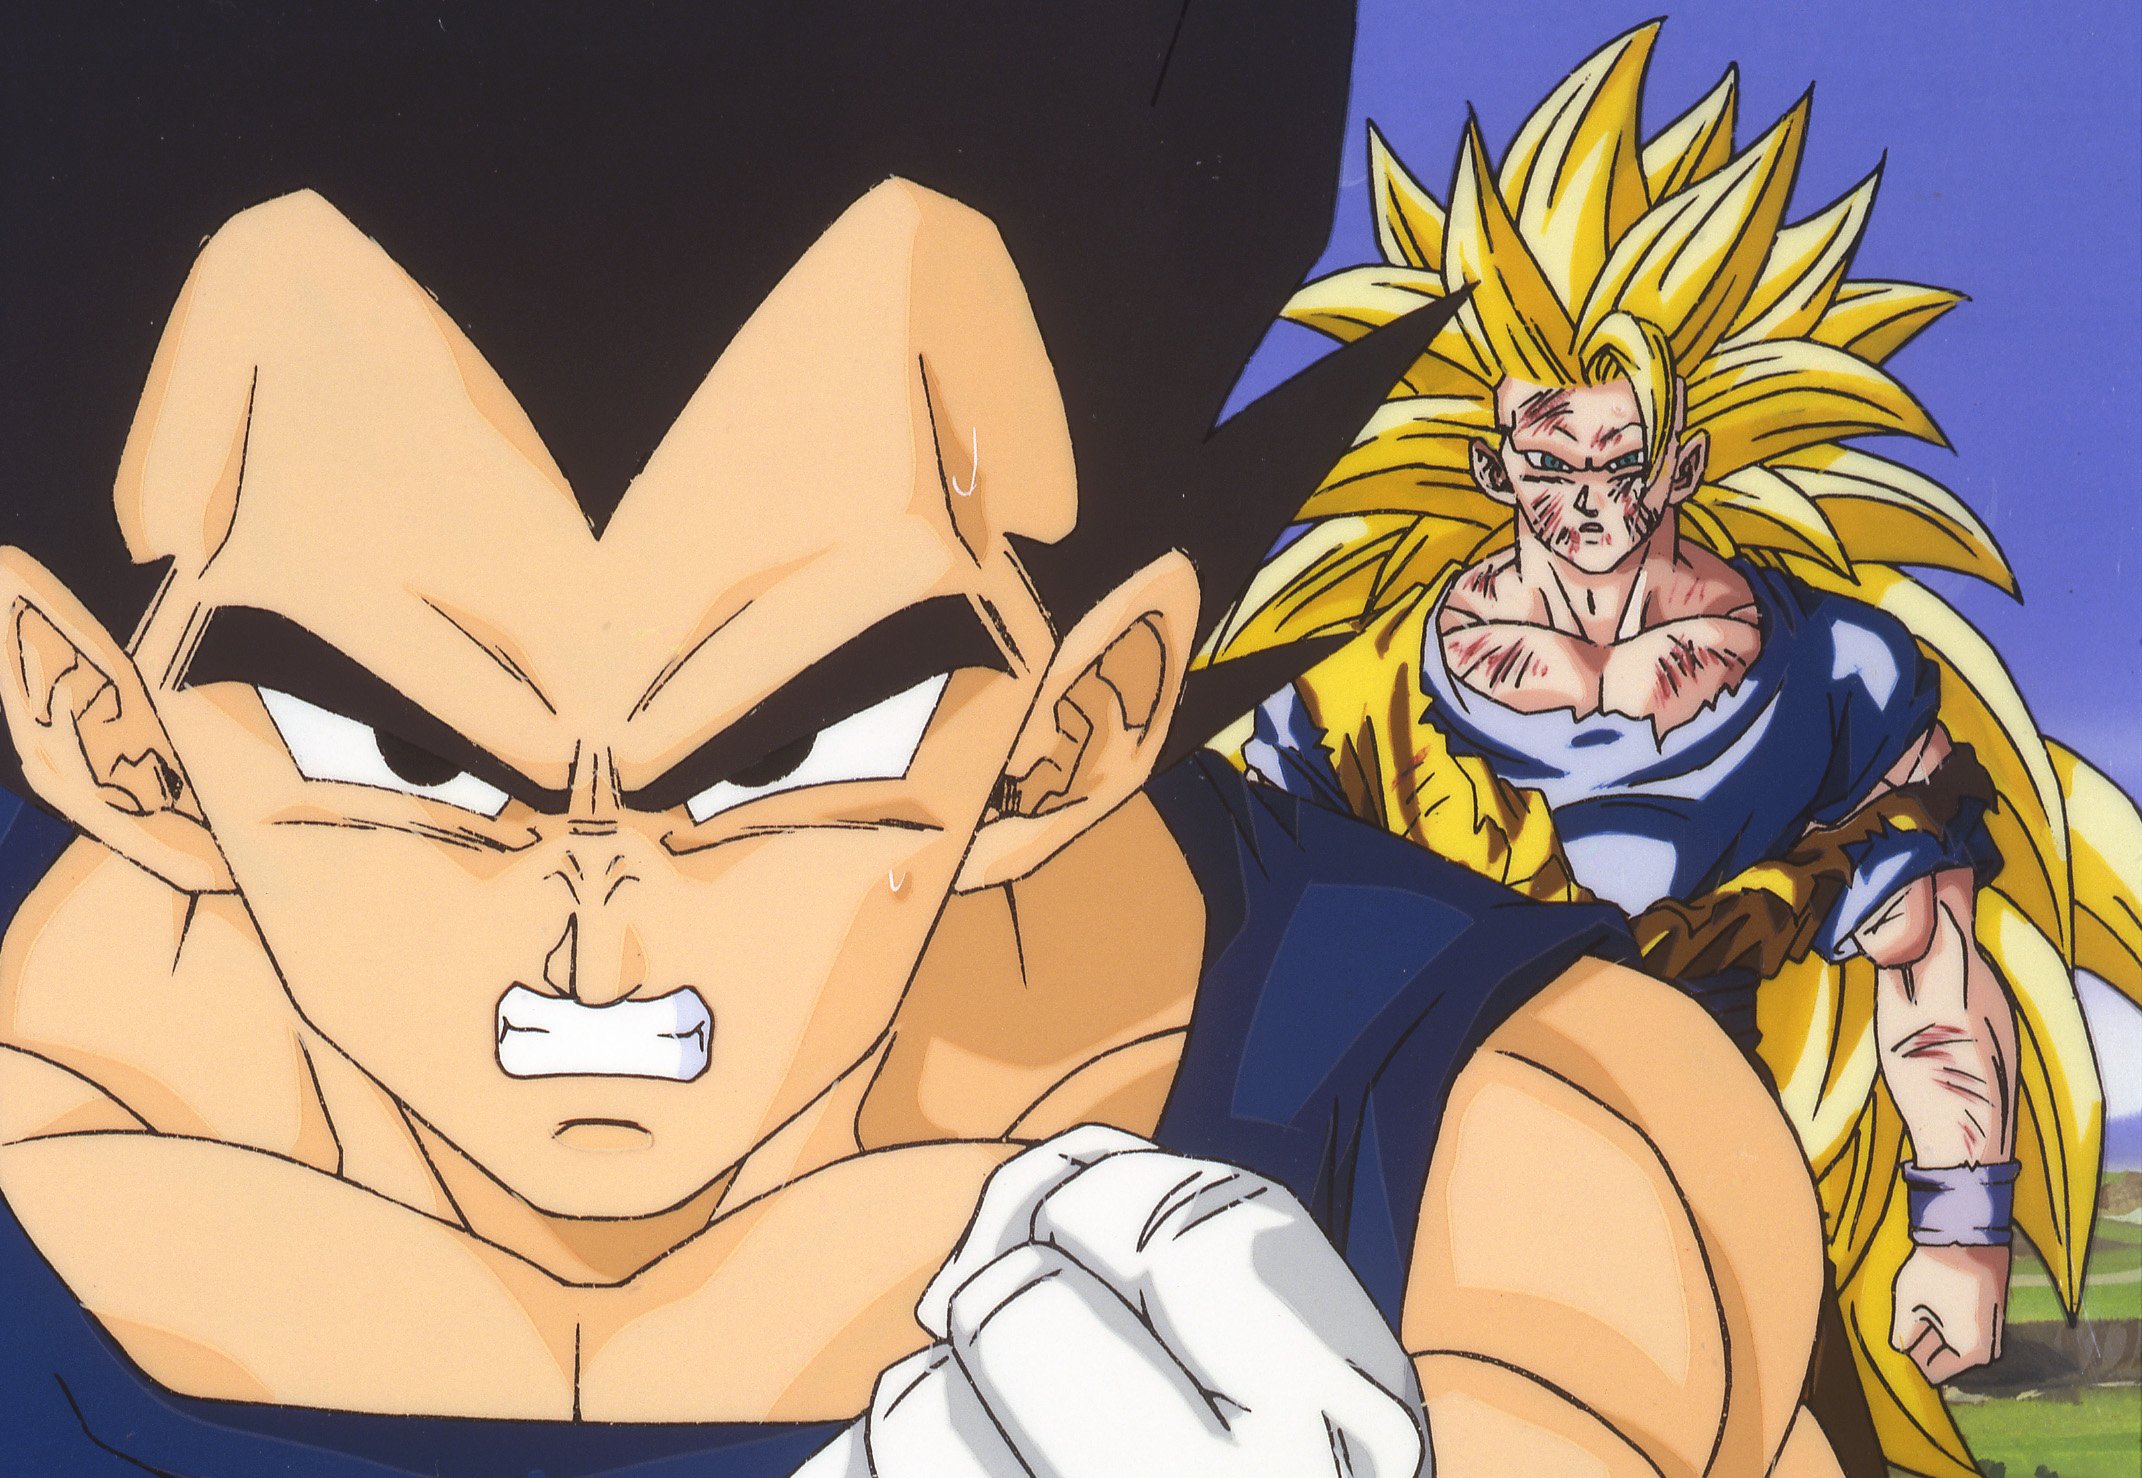 Dragon Ball Z Kai: The Final Chapters - Part 2 Review • Anime UK News